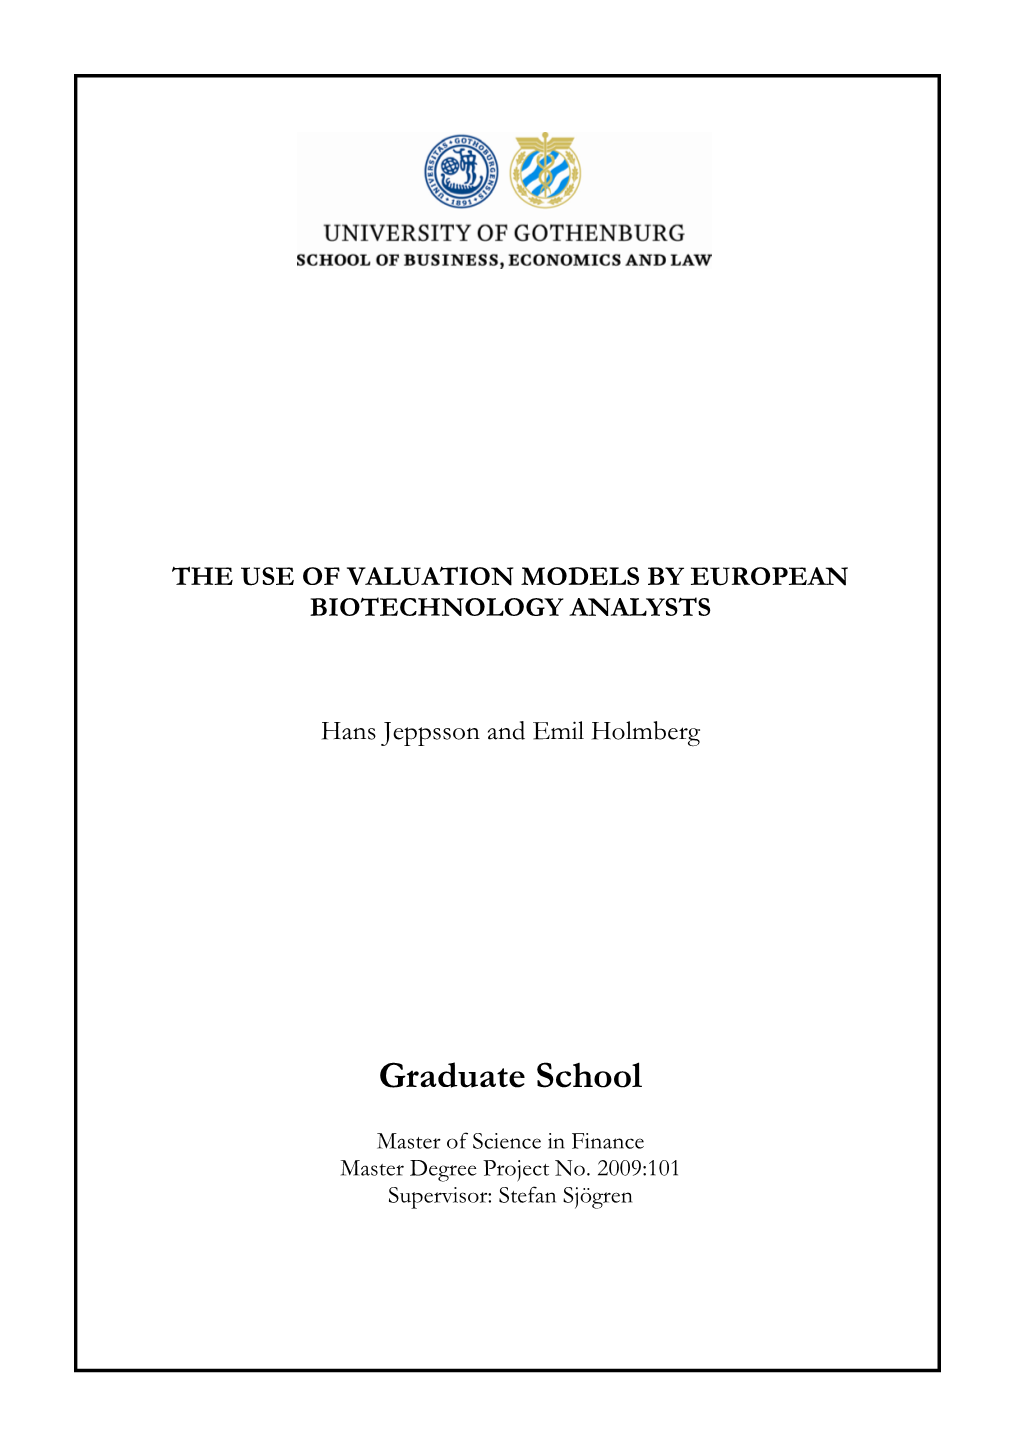 The Use of Valuation Models by European Biotechnology Analysts